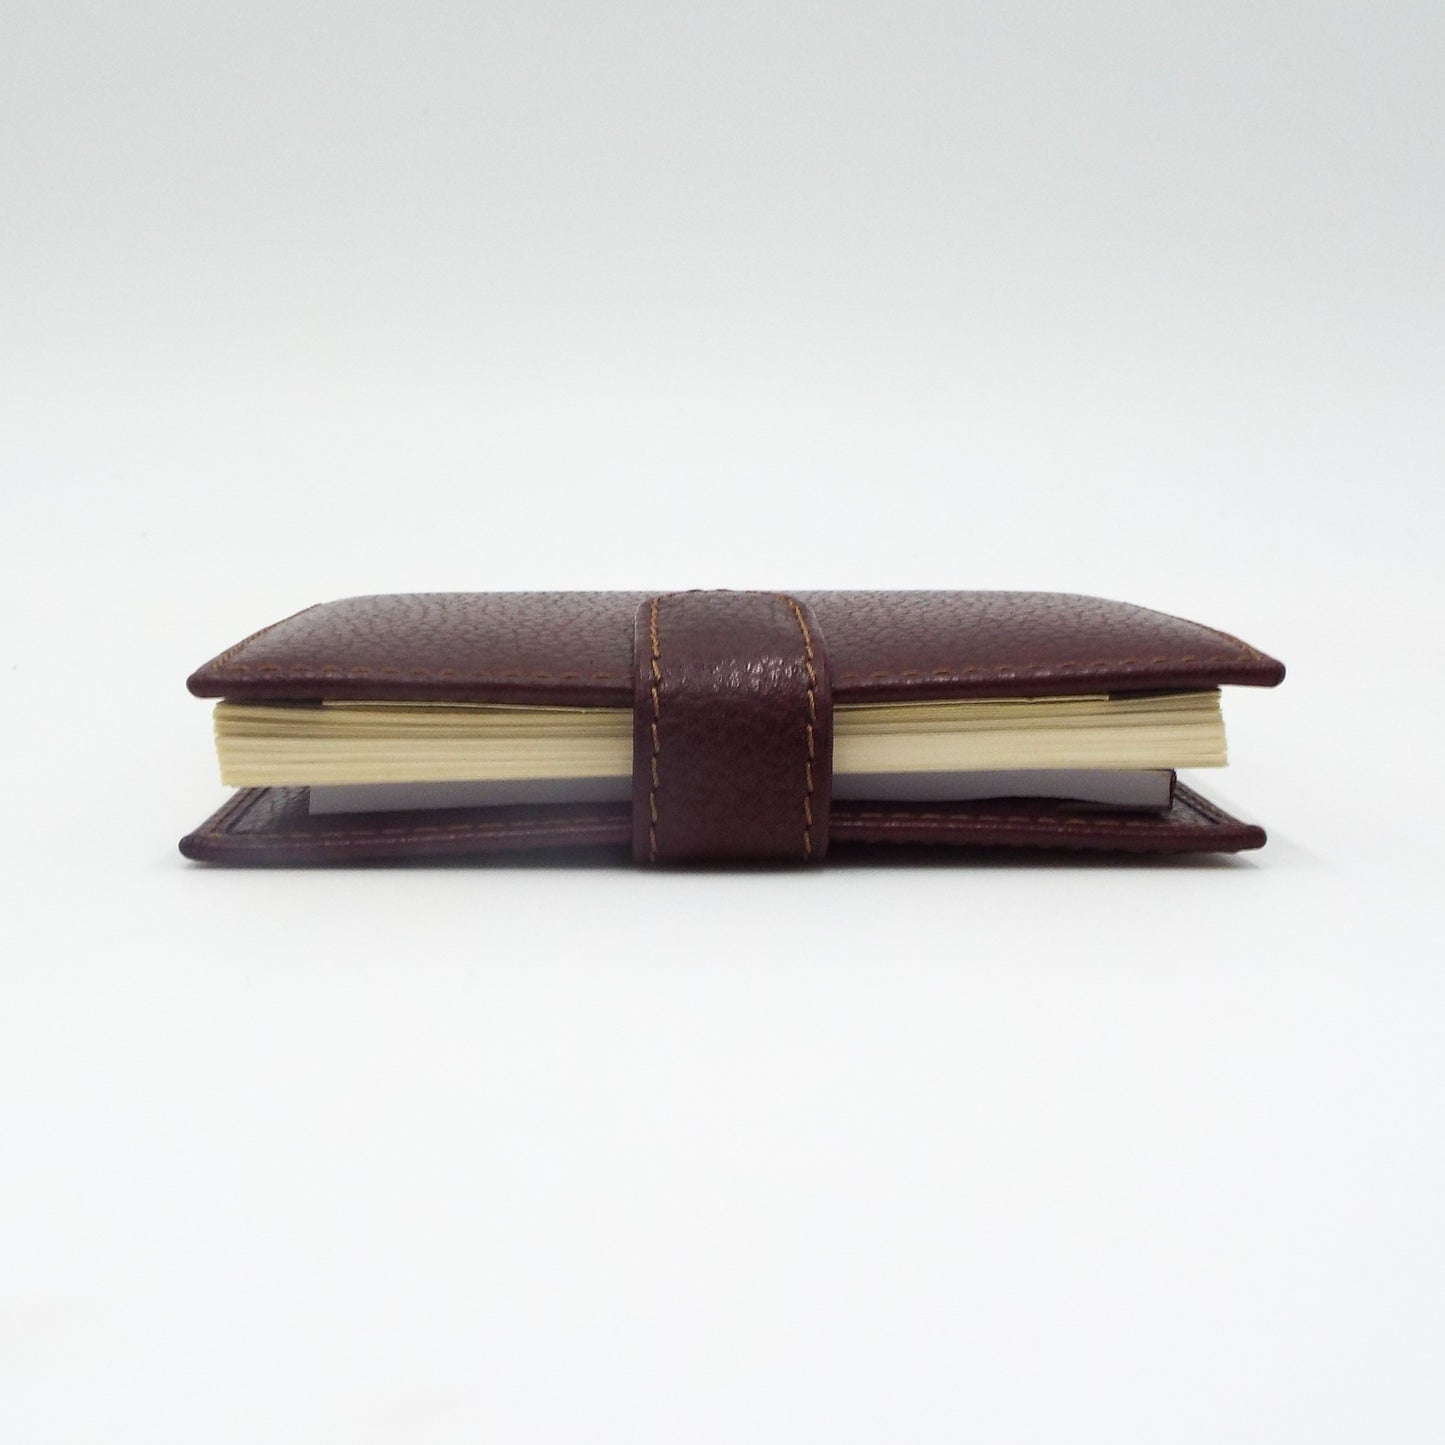 Leather: JG35 3-1/2" x 5-1/2" Cover with Snap Closure